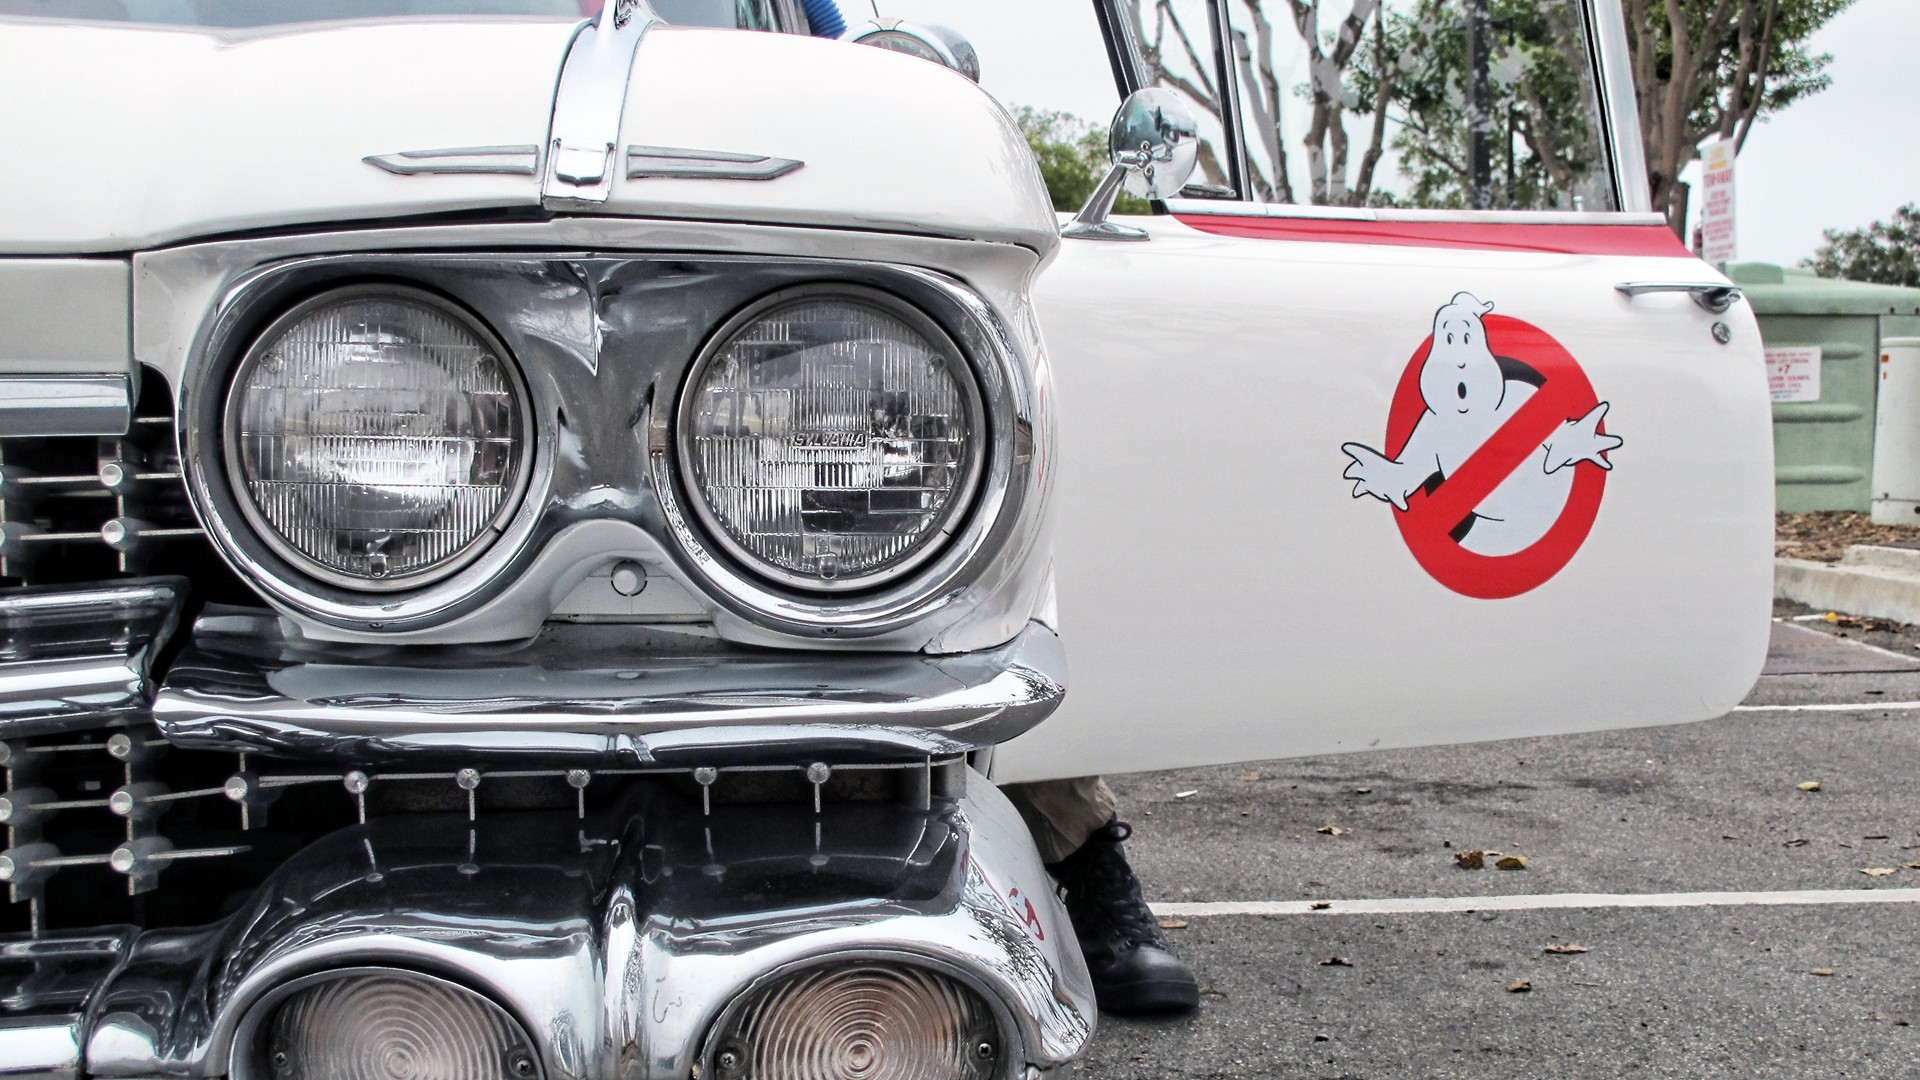 General 1920x1080 Ghostbusters car creepy Movie Vehicles Ecto-1 (Ghostbusters) logo vehicle